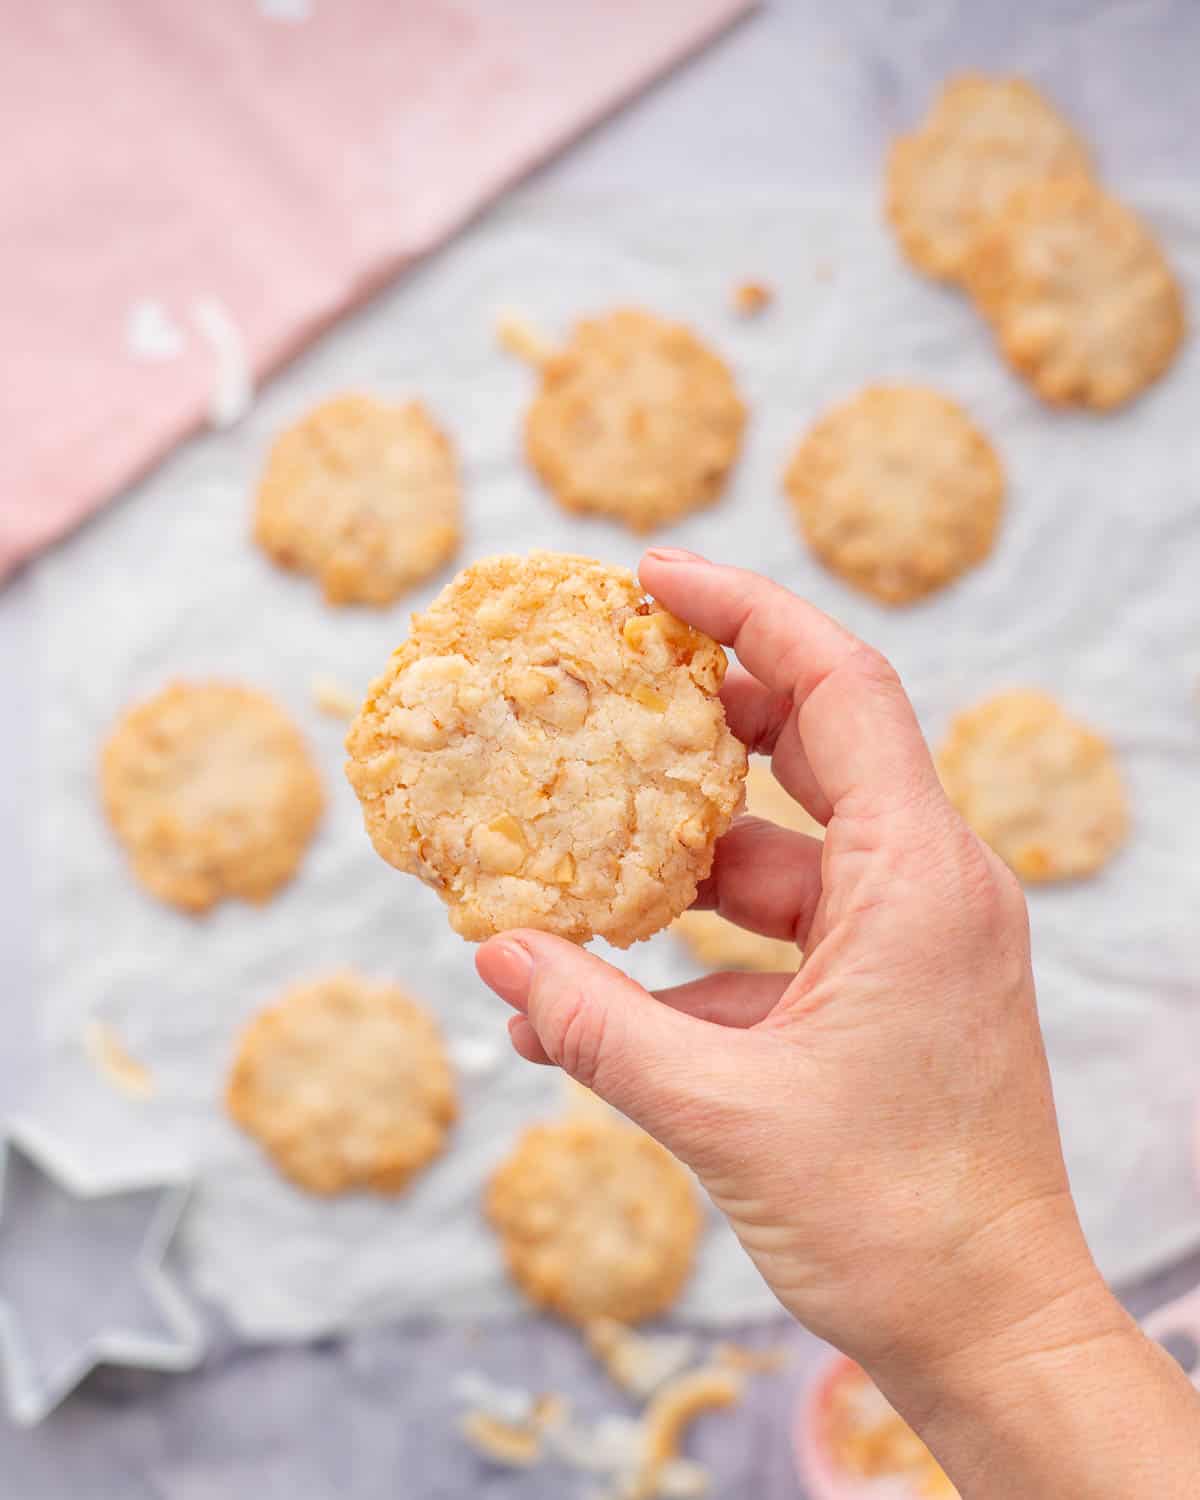 Crinkled baking paper with golden brown Gluten Free Coconut Cookies with a hand holding 1 cookie